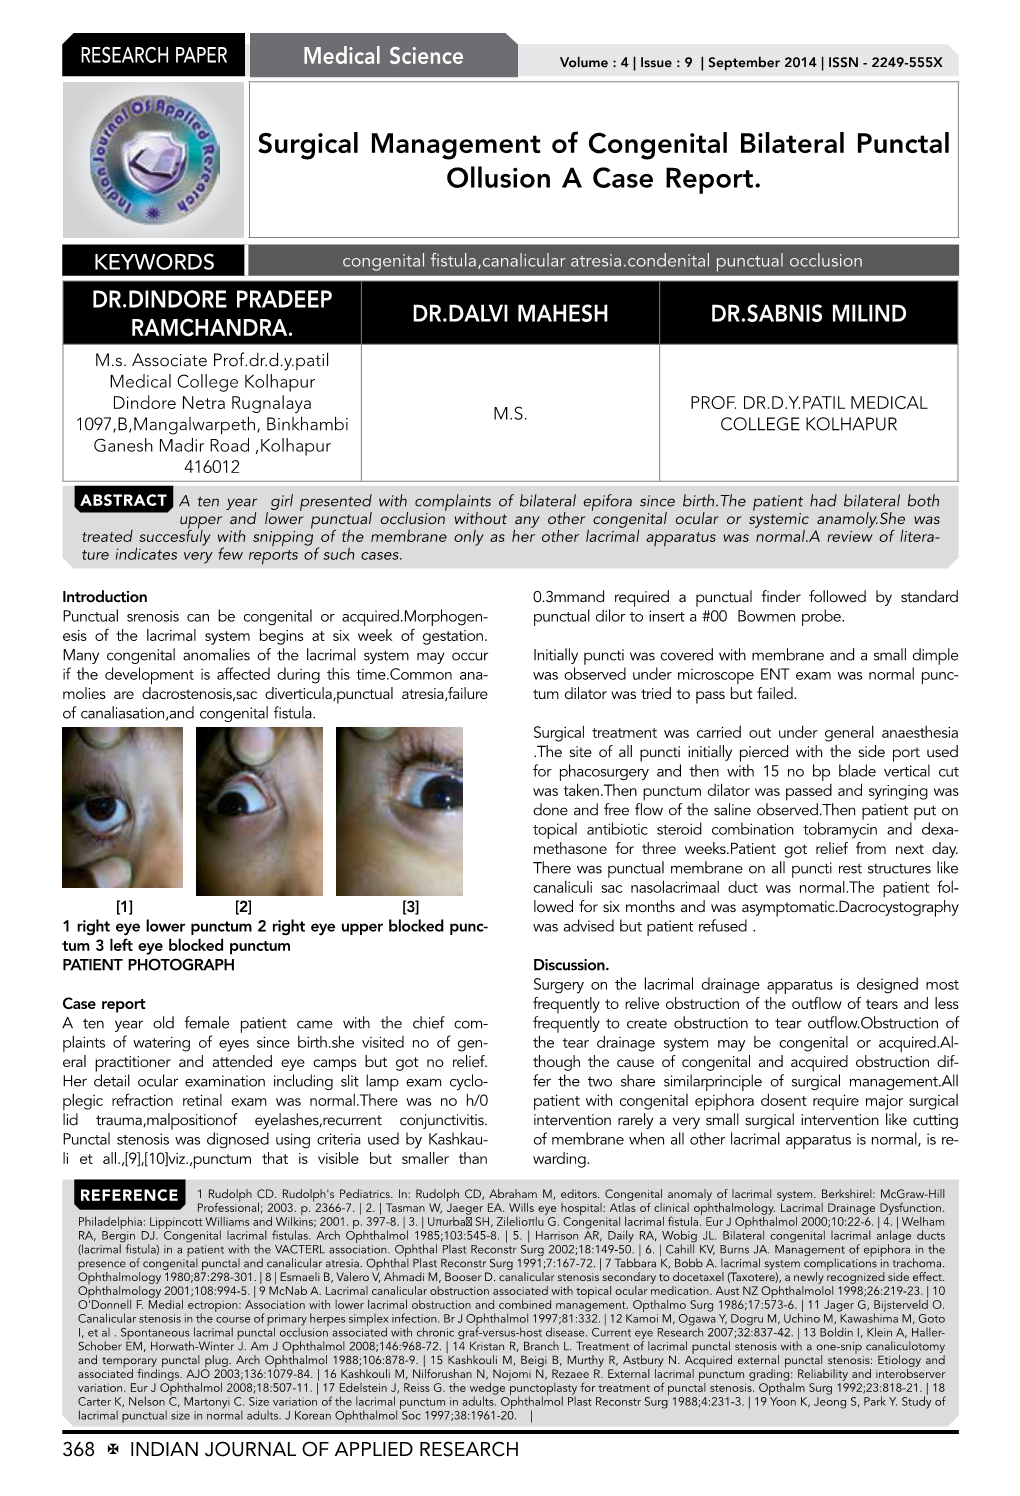 Surgical Management of Congenital Bilateral Punctal Ollusion a Case Report